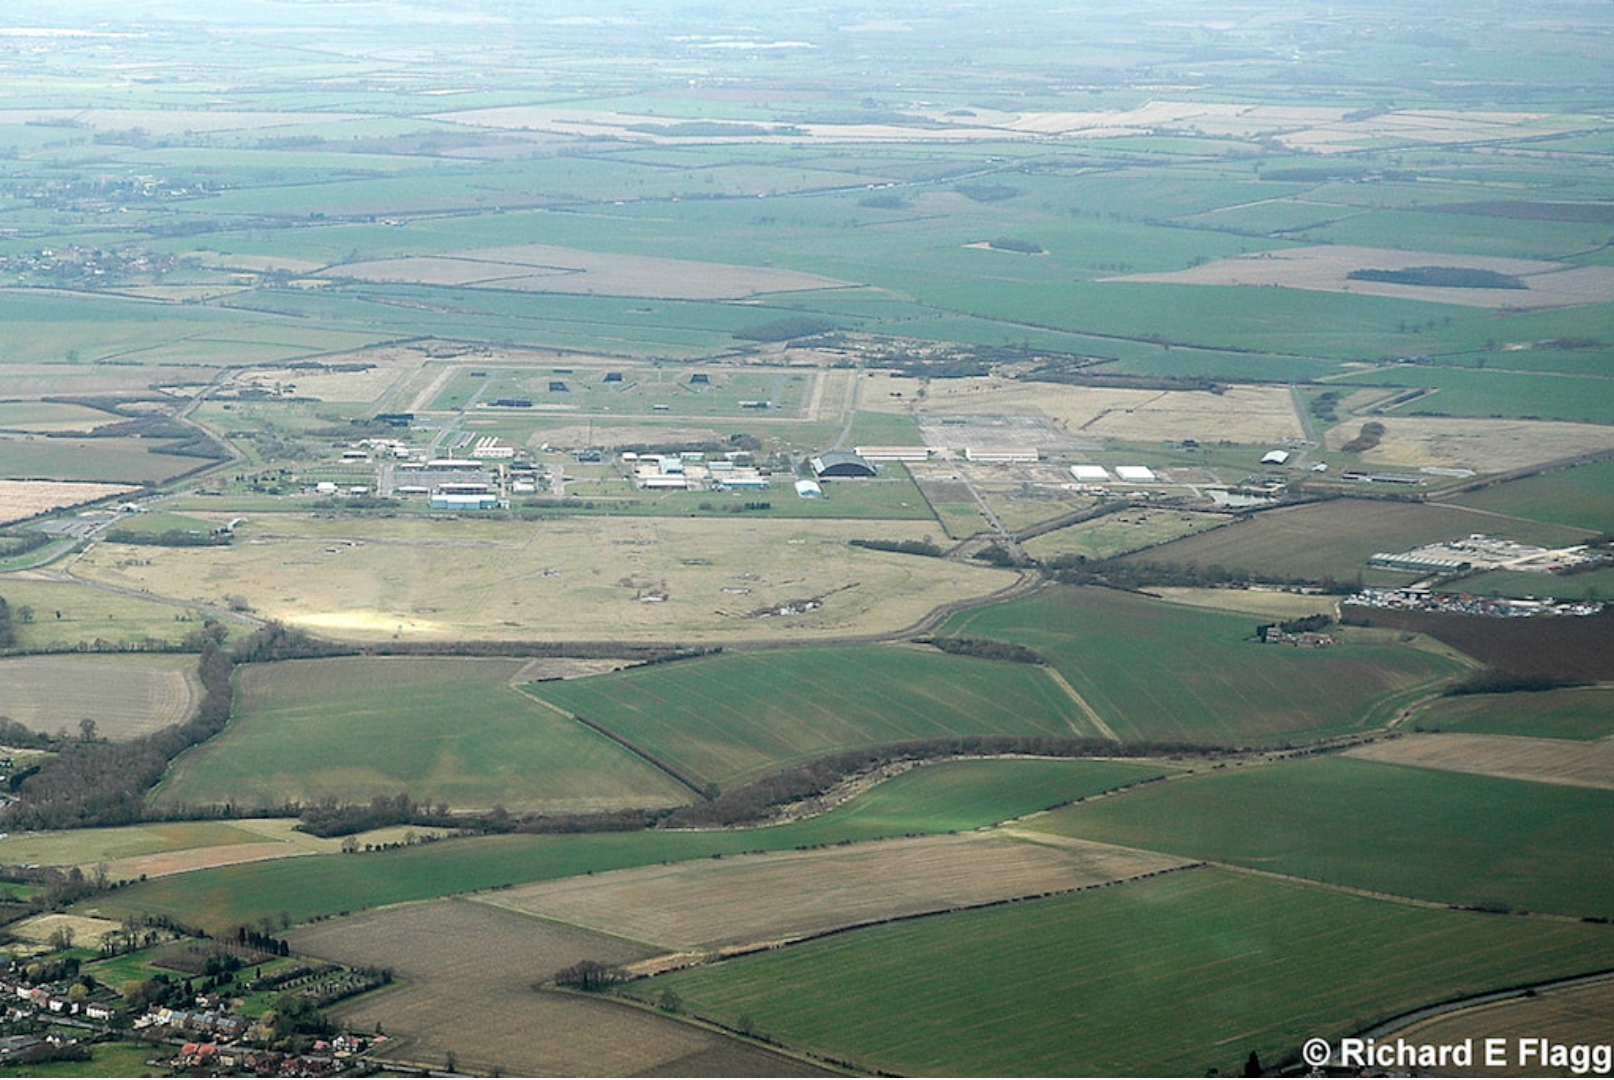 002Aerial View of RAF Molesworth Airfield 2 - 14 March 2009.png